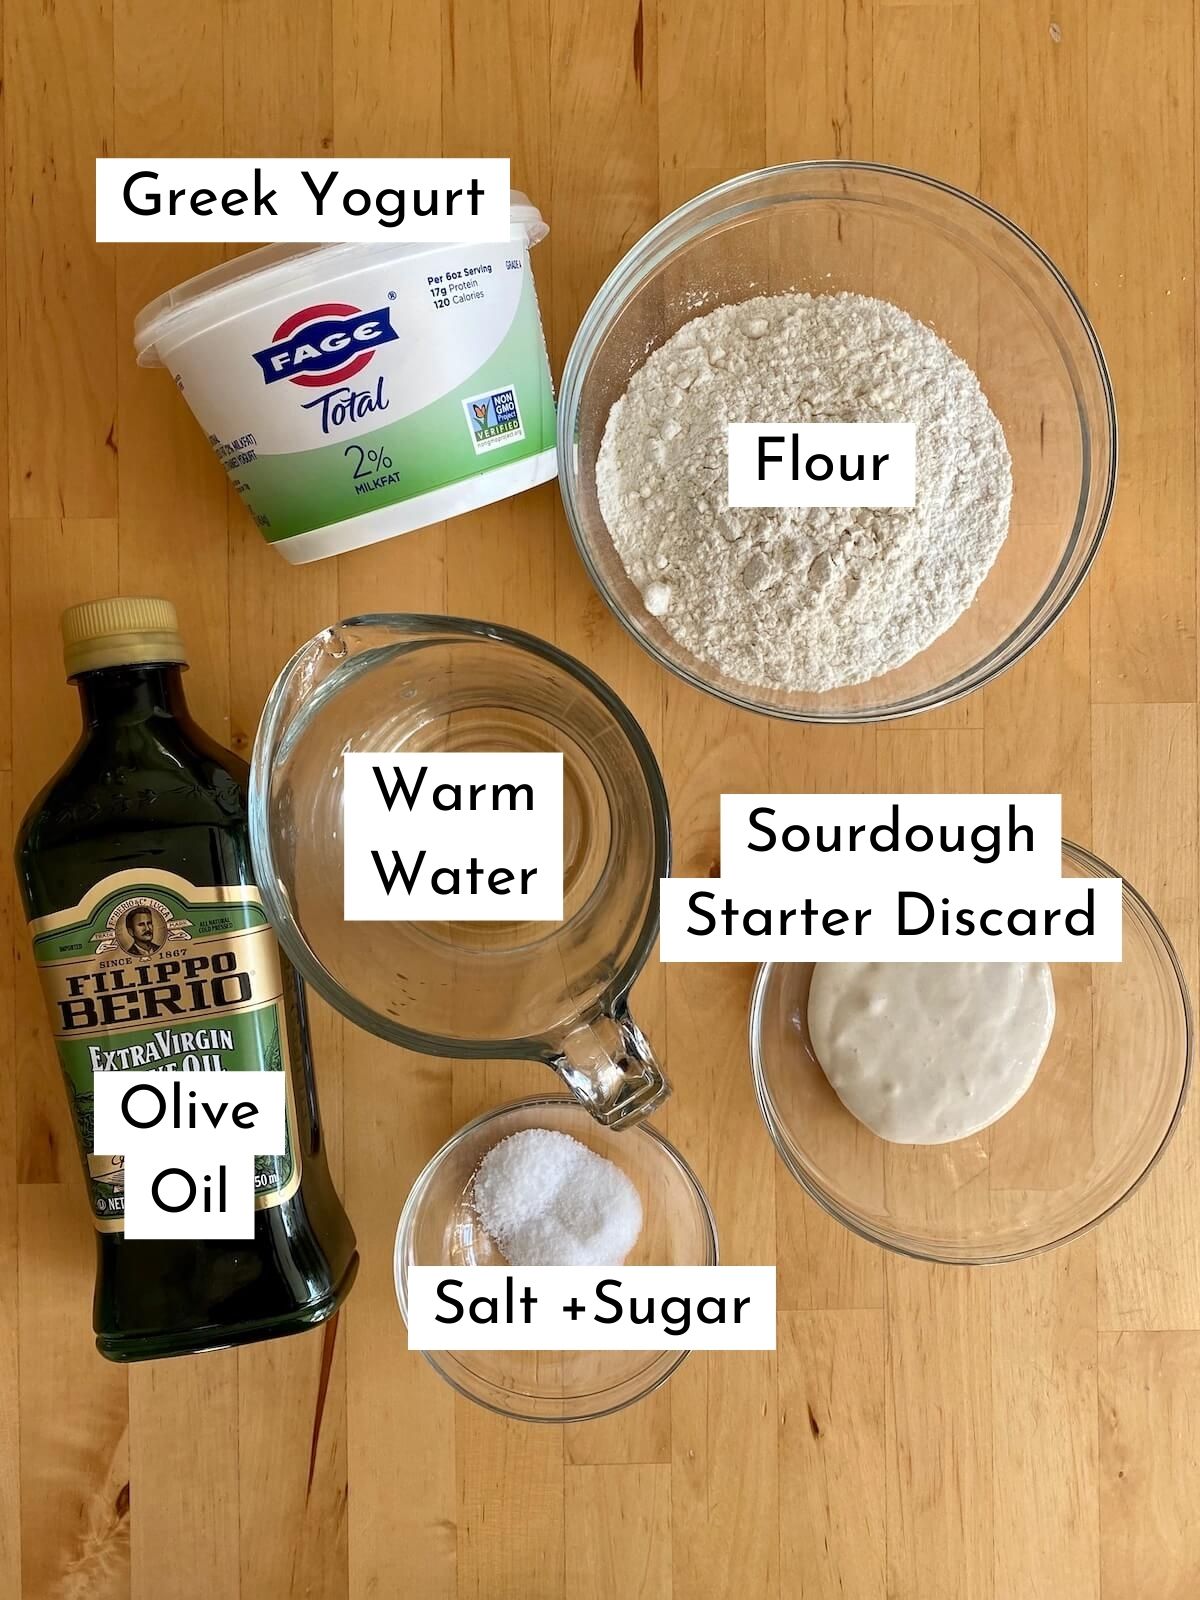 The ingredients to make sourdough discard naan bread on a wooden countertop. The ingredients are labeled with text over each one. They include flour, Greek yogurt, warm water, sourdough discard starter, olive oil, salt, and sugar.